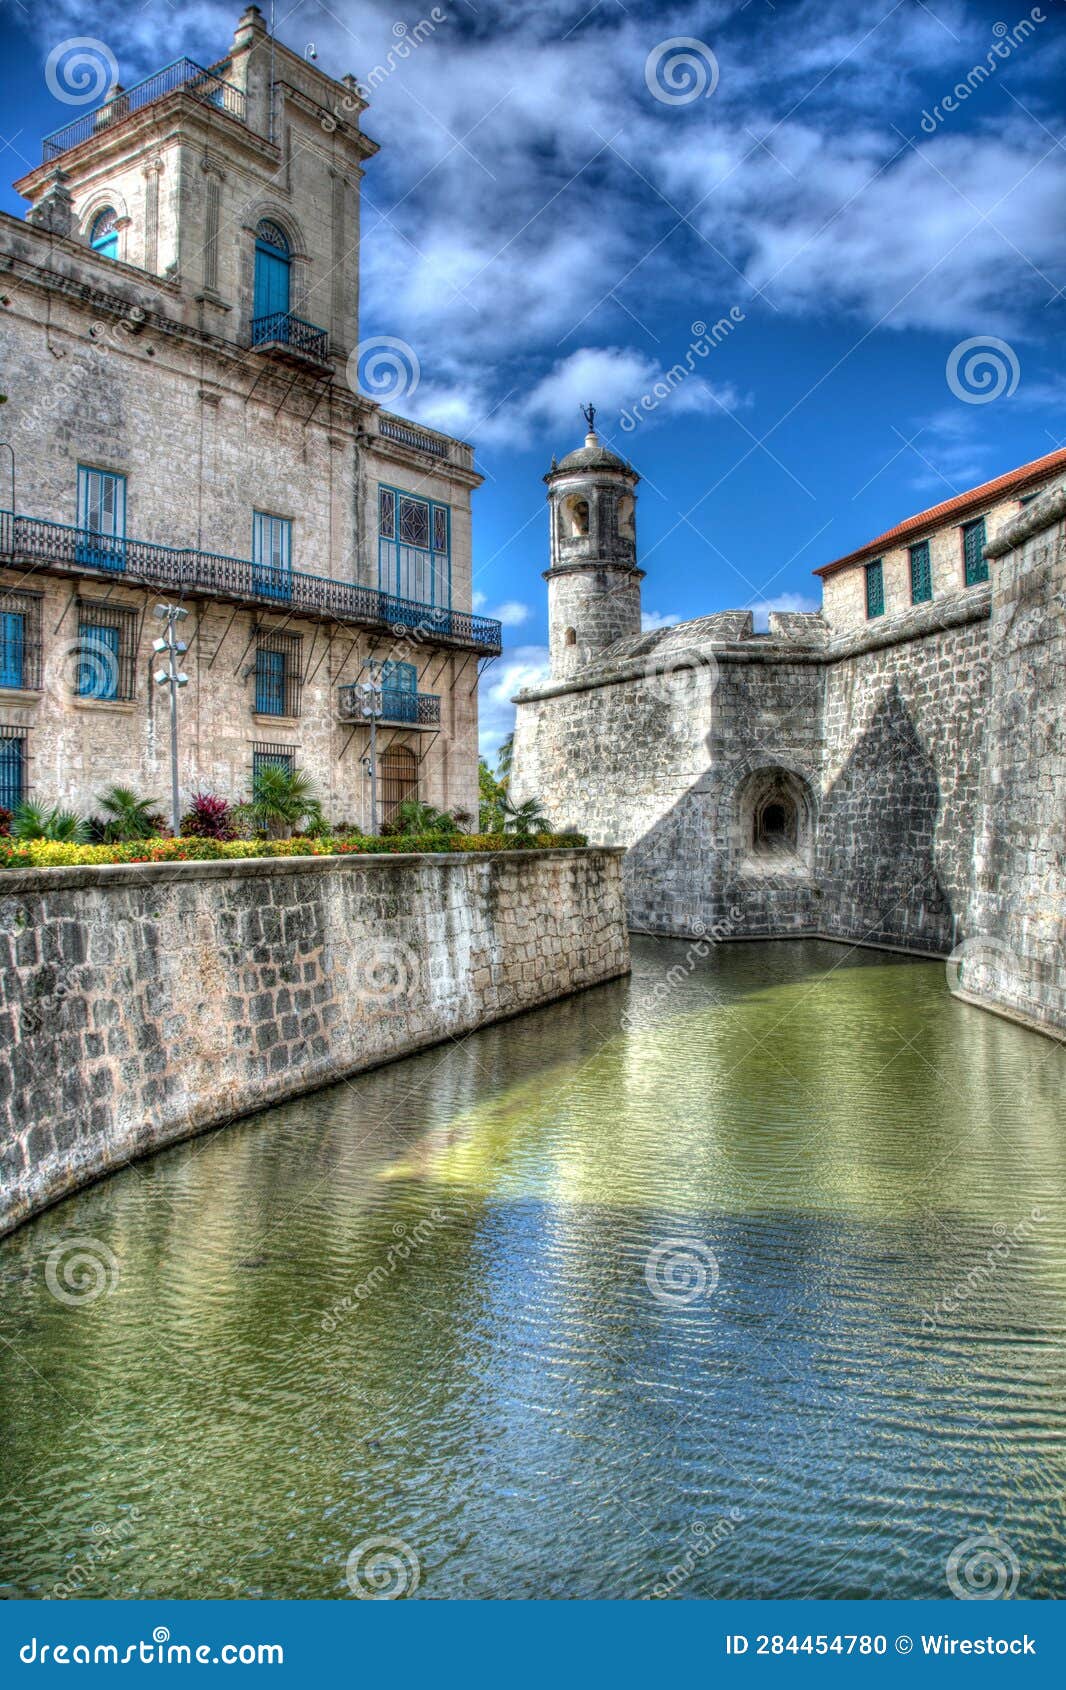 view of la real fuerza historical fortress in havana, cuba